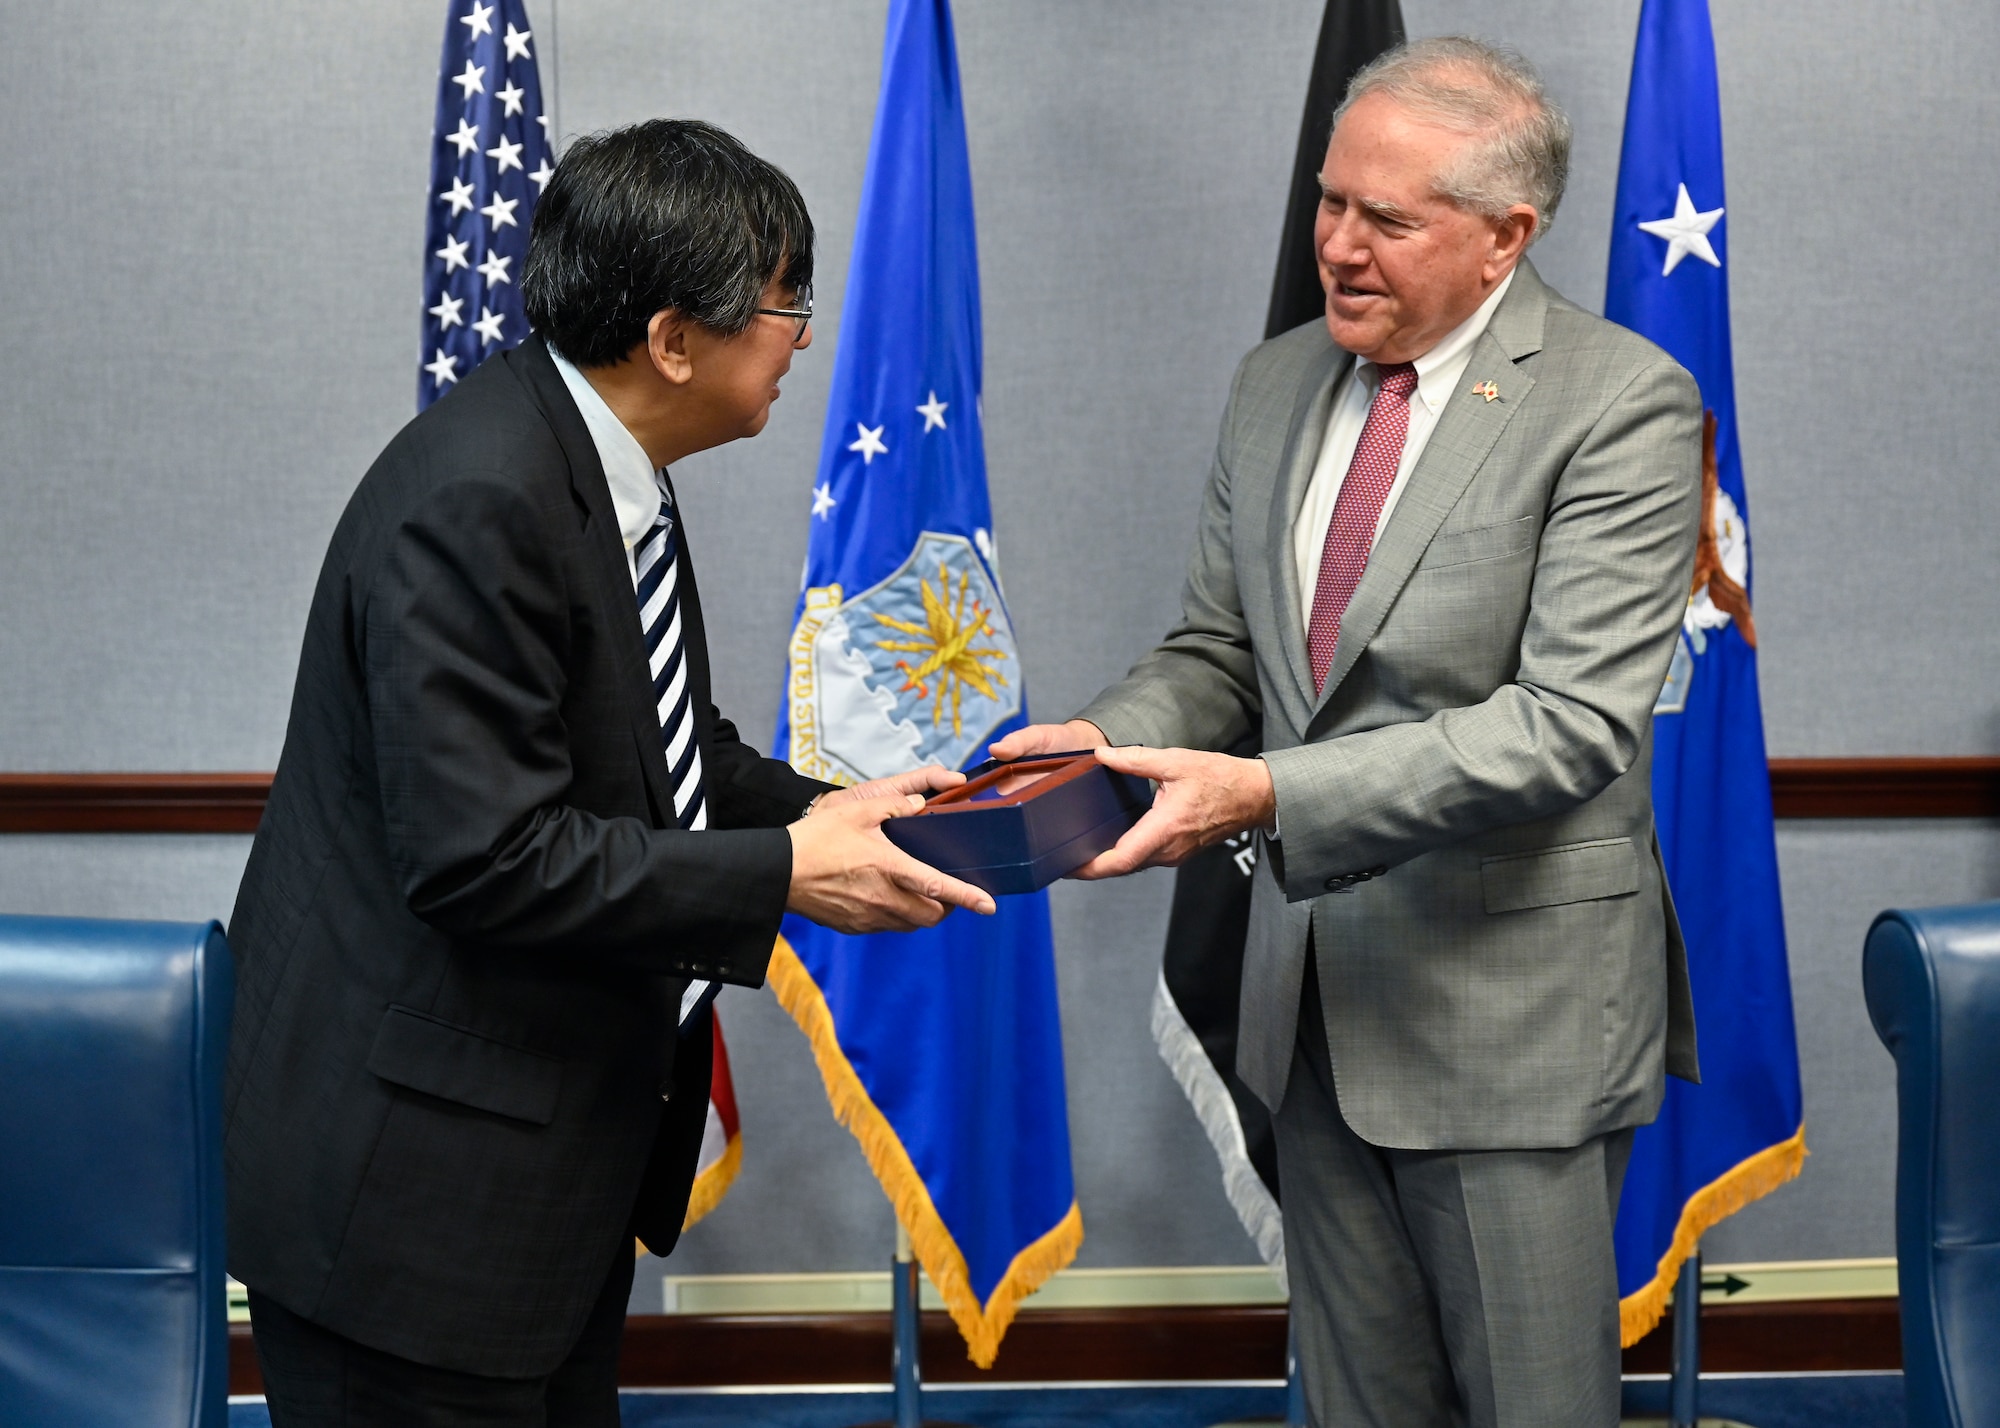 Secretary of the Air Force Frank Kendall, right, exchanges gifts with Hideki Tsuchimoto, commissioner of the Acquisition, Technology and Logistics Agency, Japanese Ministry of Defense.